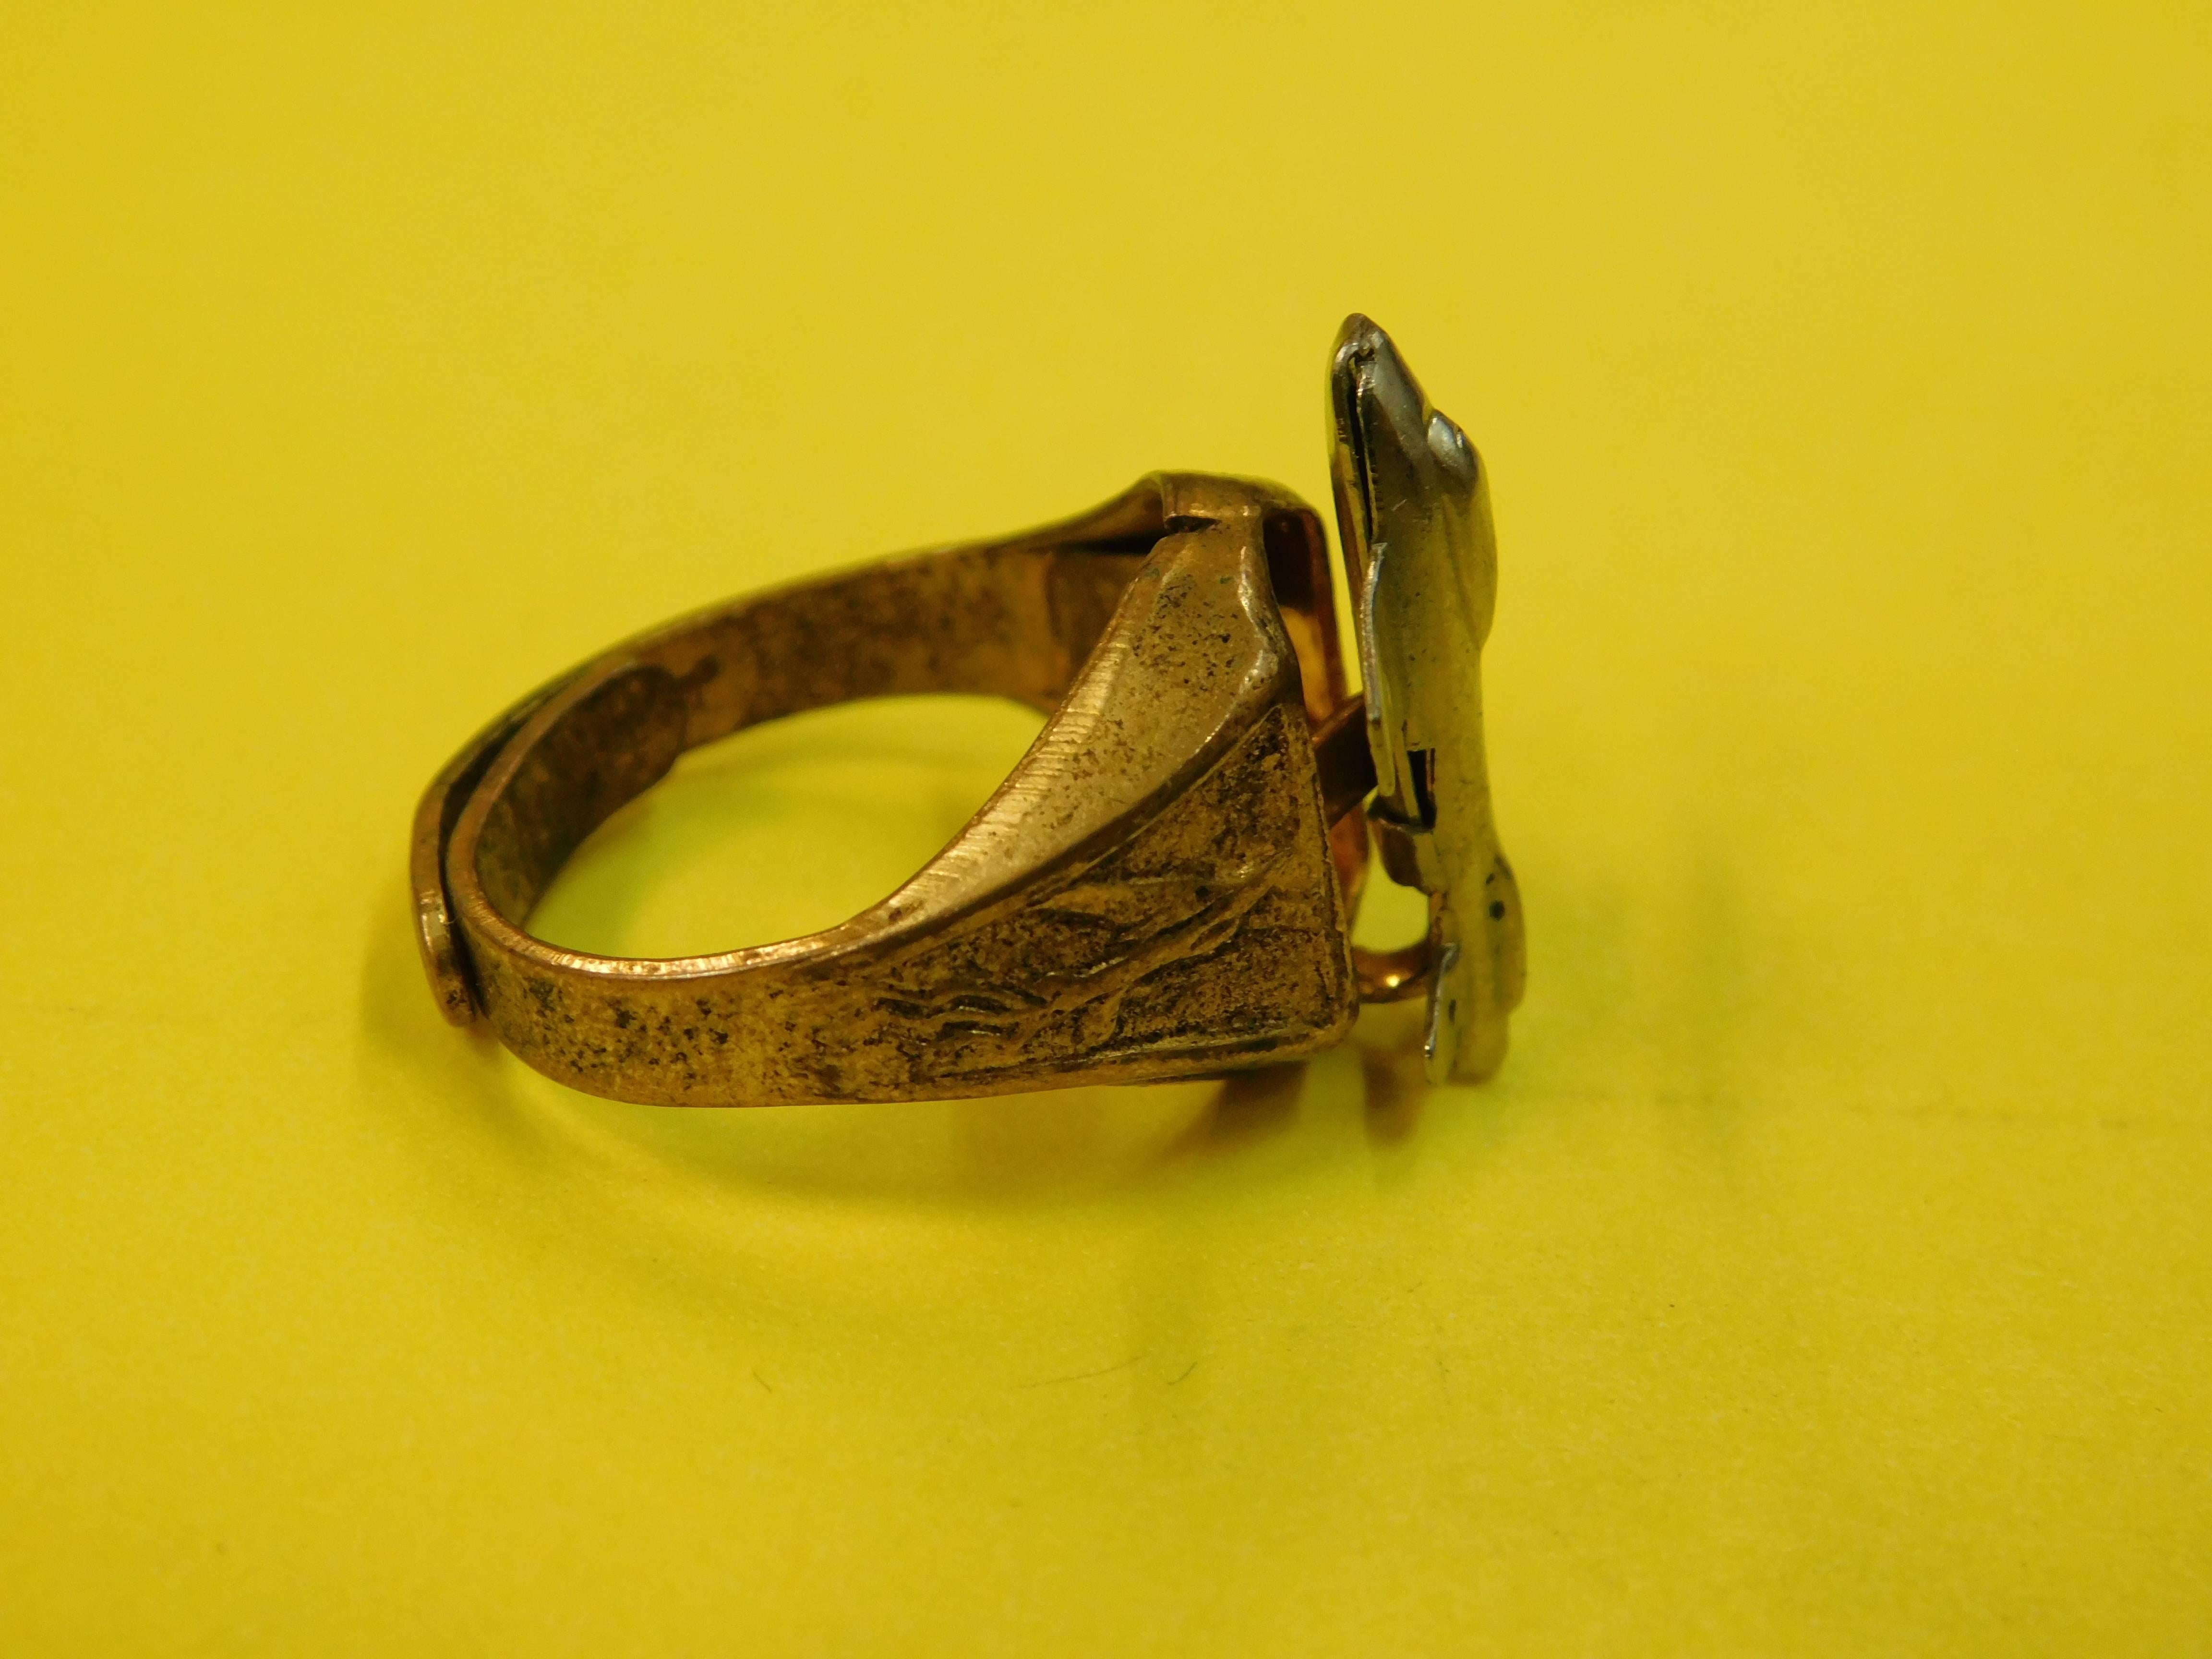 Rare 1948 Kelloggs Pep whole wheat cereal jet ring as advertised on the Superman radio program. The ring with adjustable 24-karat gold plate band has airplane image on each side. Top has nickel finish luster metal spring-loaded airplane which shoots